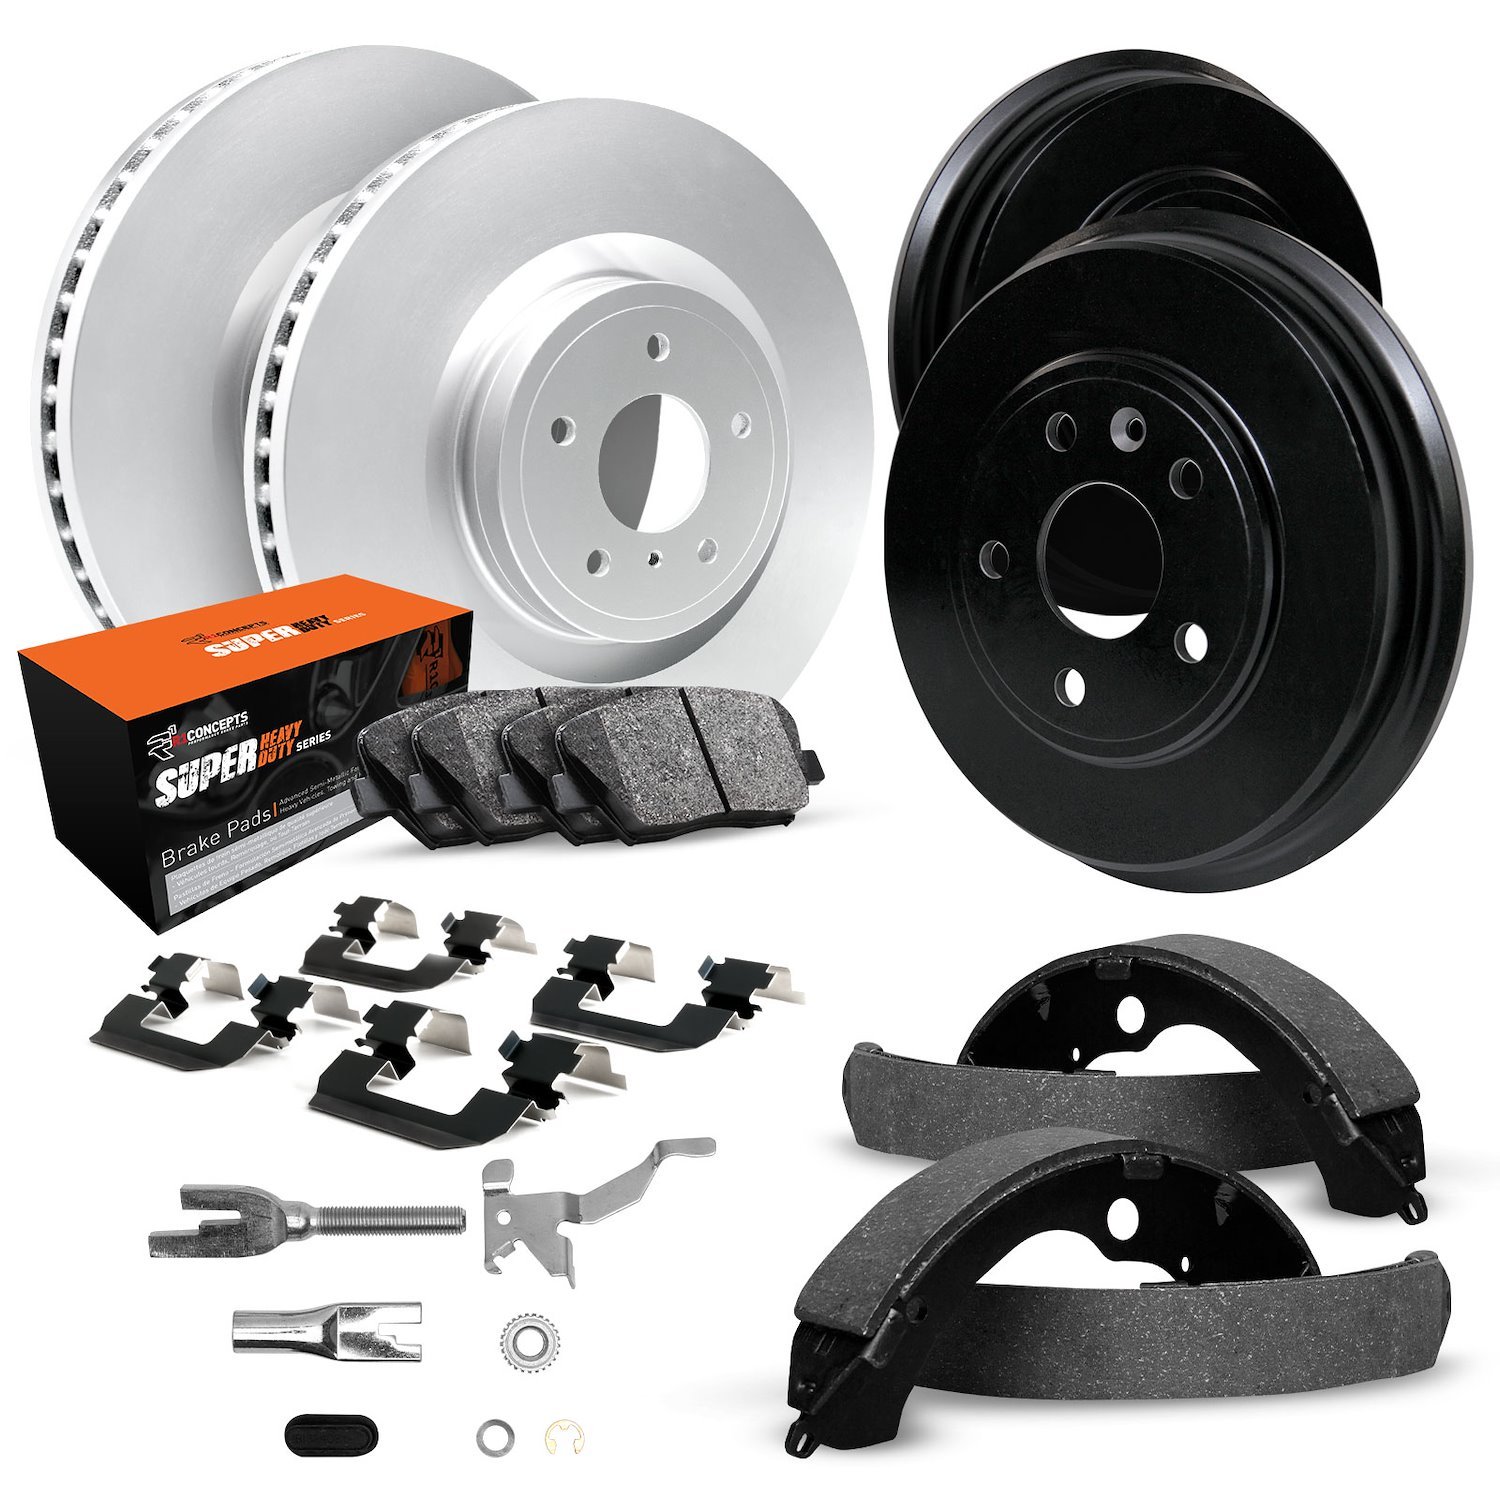 GEO-Carbon Brake Rotor & Drum Set w/Super-Duty Pads, Shoes, Hardware/Adjusters, 1972-1975 GM, Position: Front & Rear